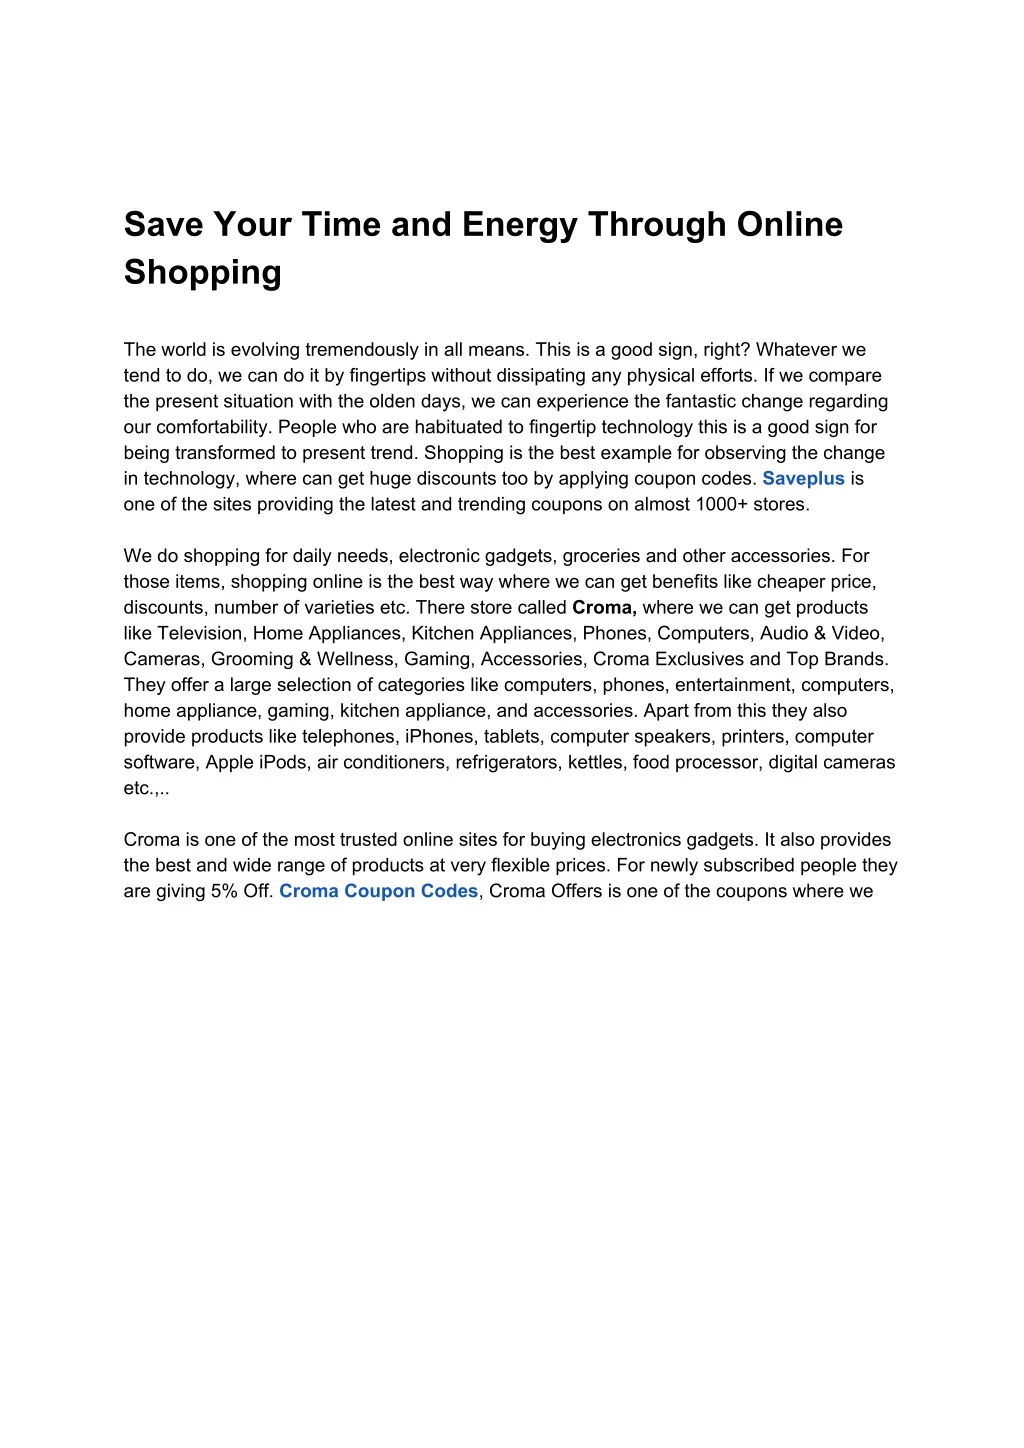 save your time and energy through online shopping